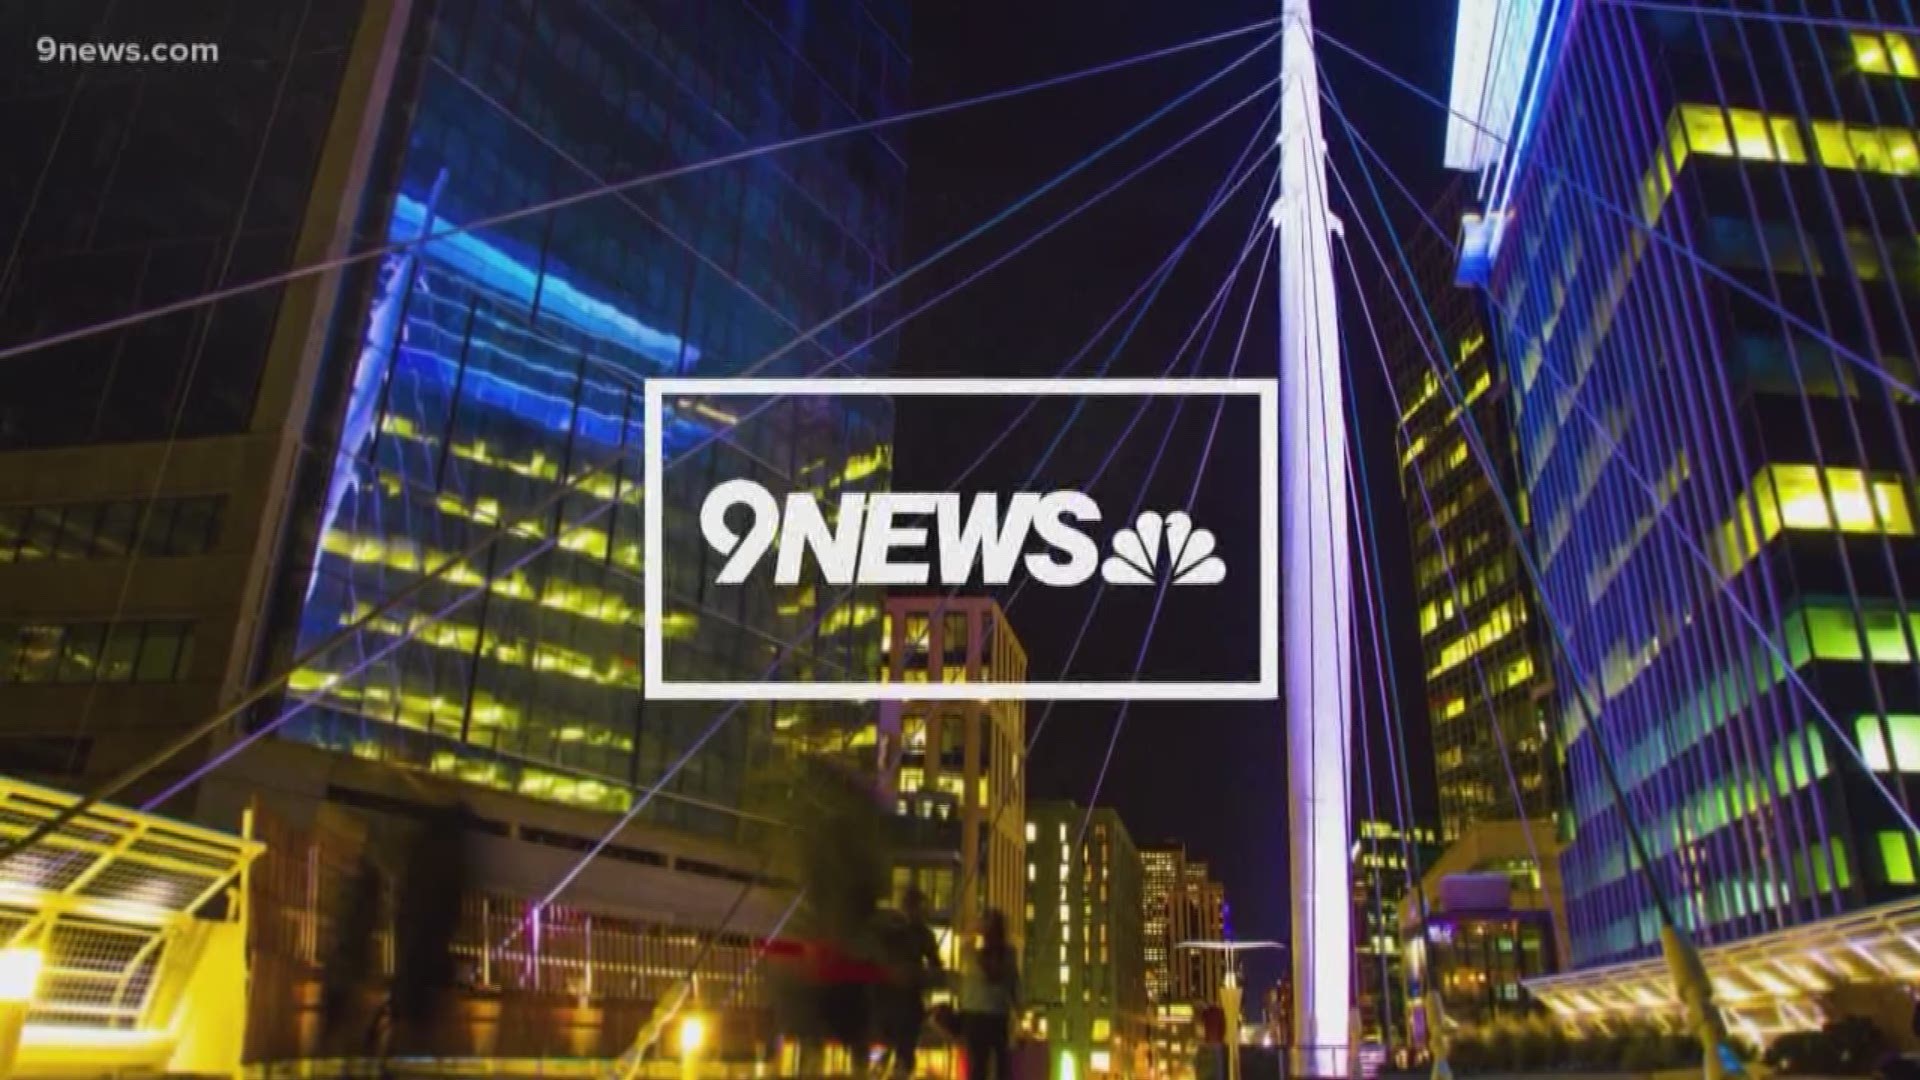 The top stories and full forecast from the evening news on 7/19/19.